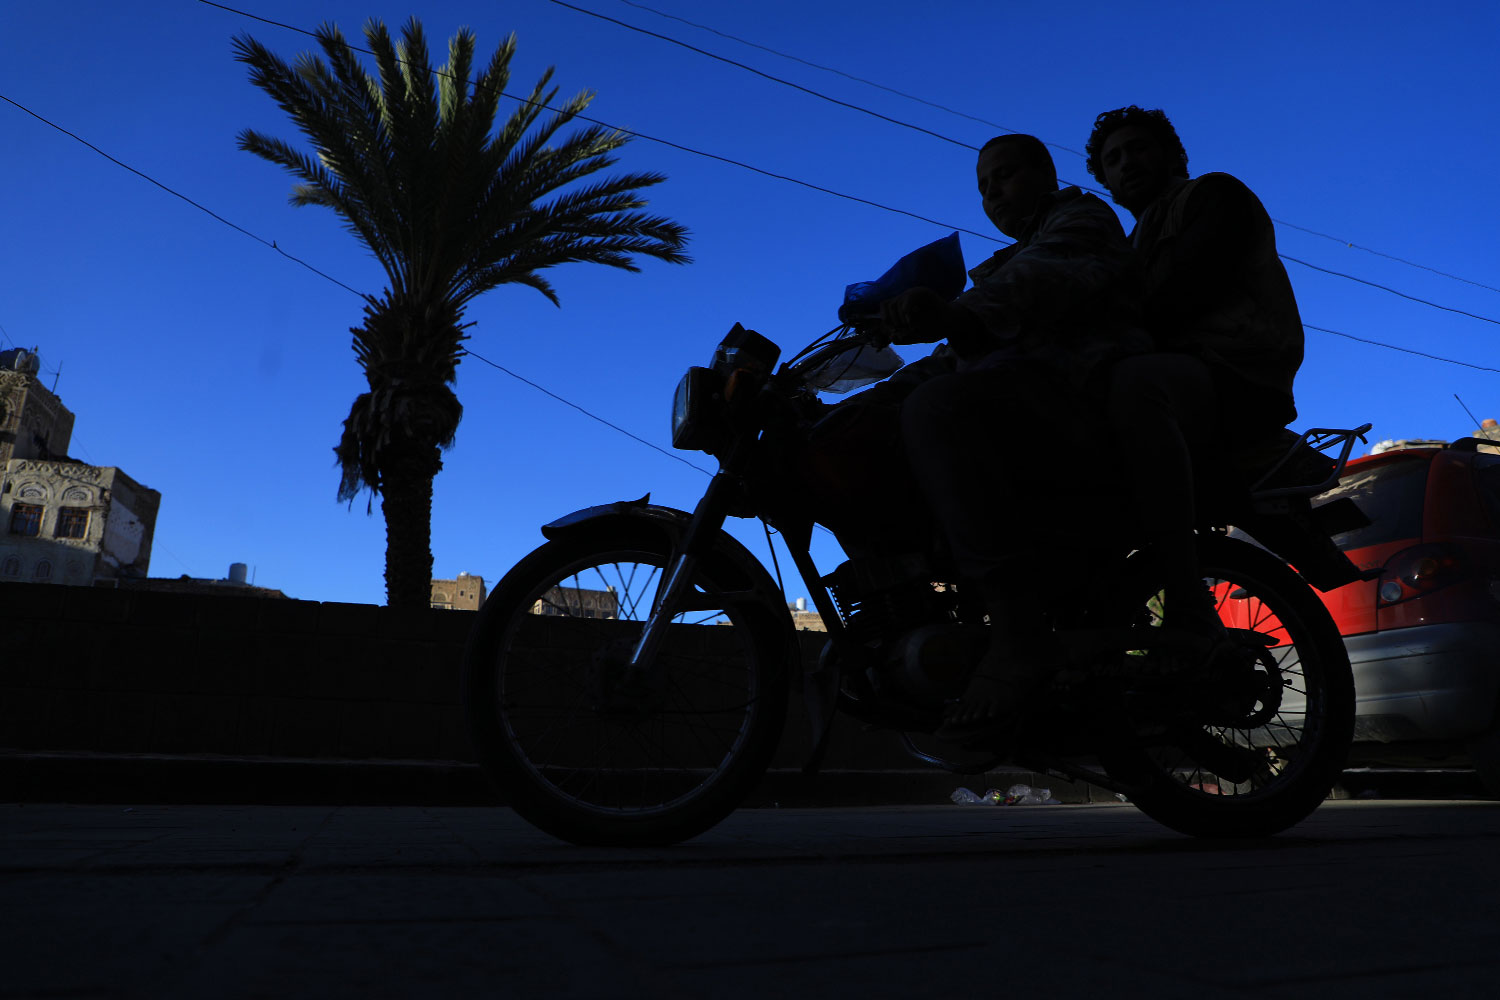 Yemenis ride a motorbike past historical buildings in the old quarter of the capital Sanaa on November 14, 2018.